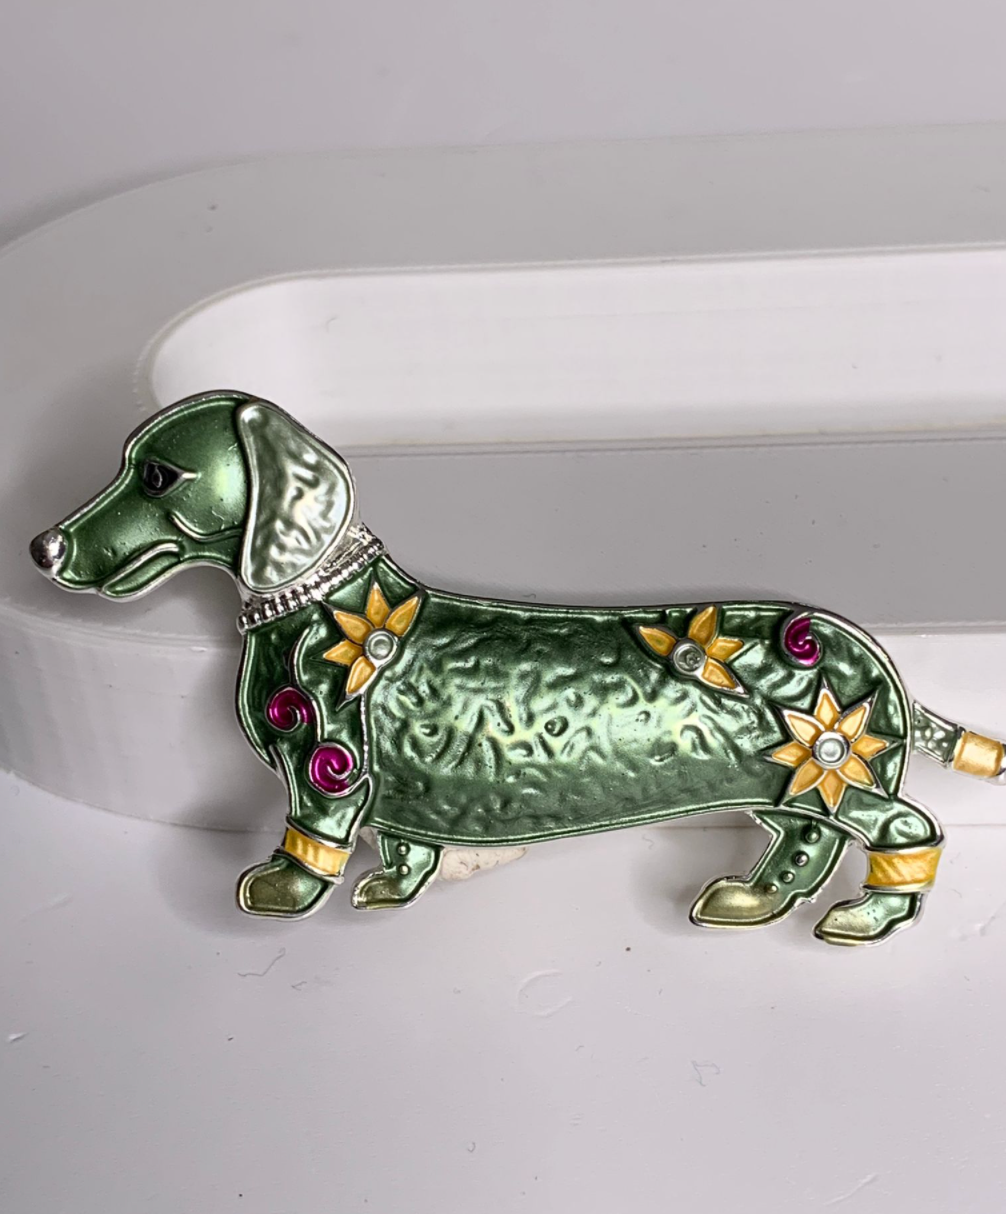 Magnetic brooch & scarf clip - 'sausage dog' design in shades of shiny silver, green, mustard and hints of dark red